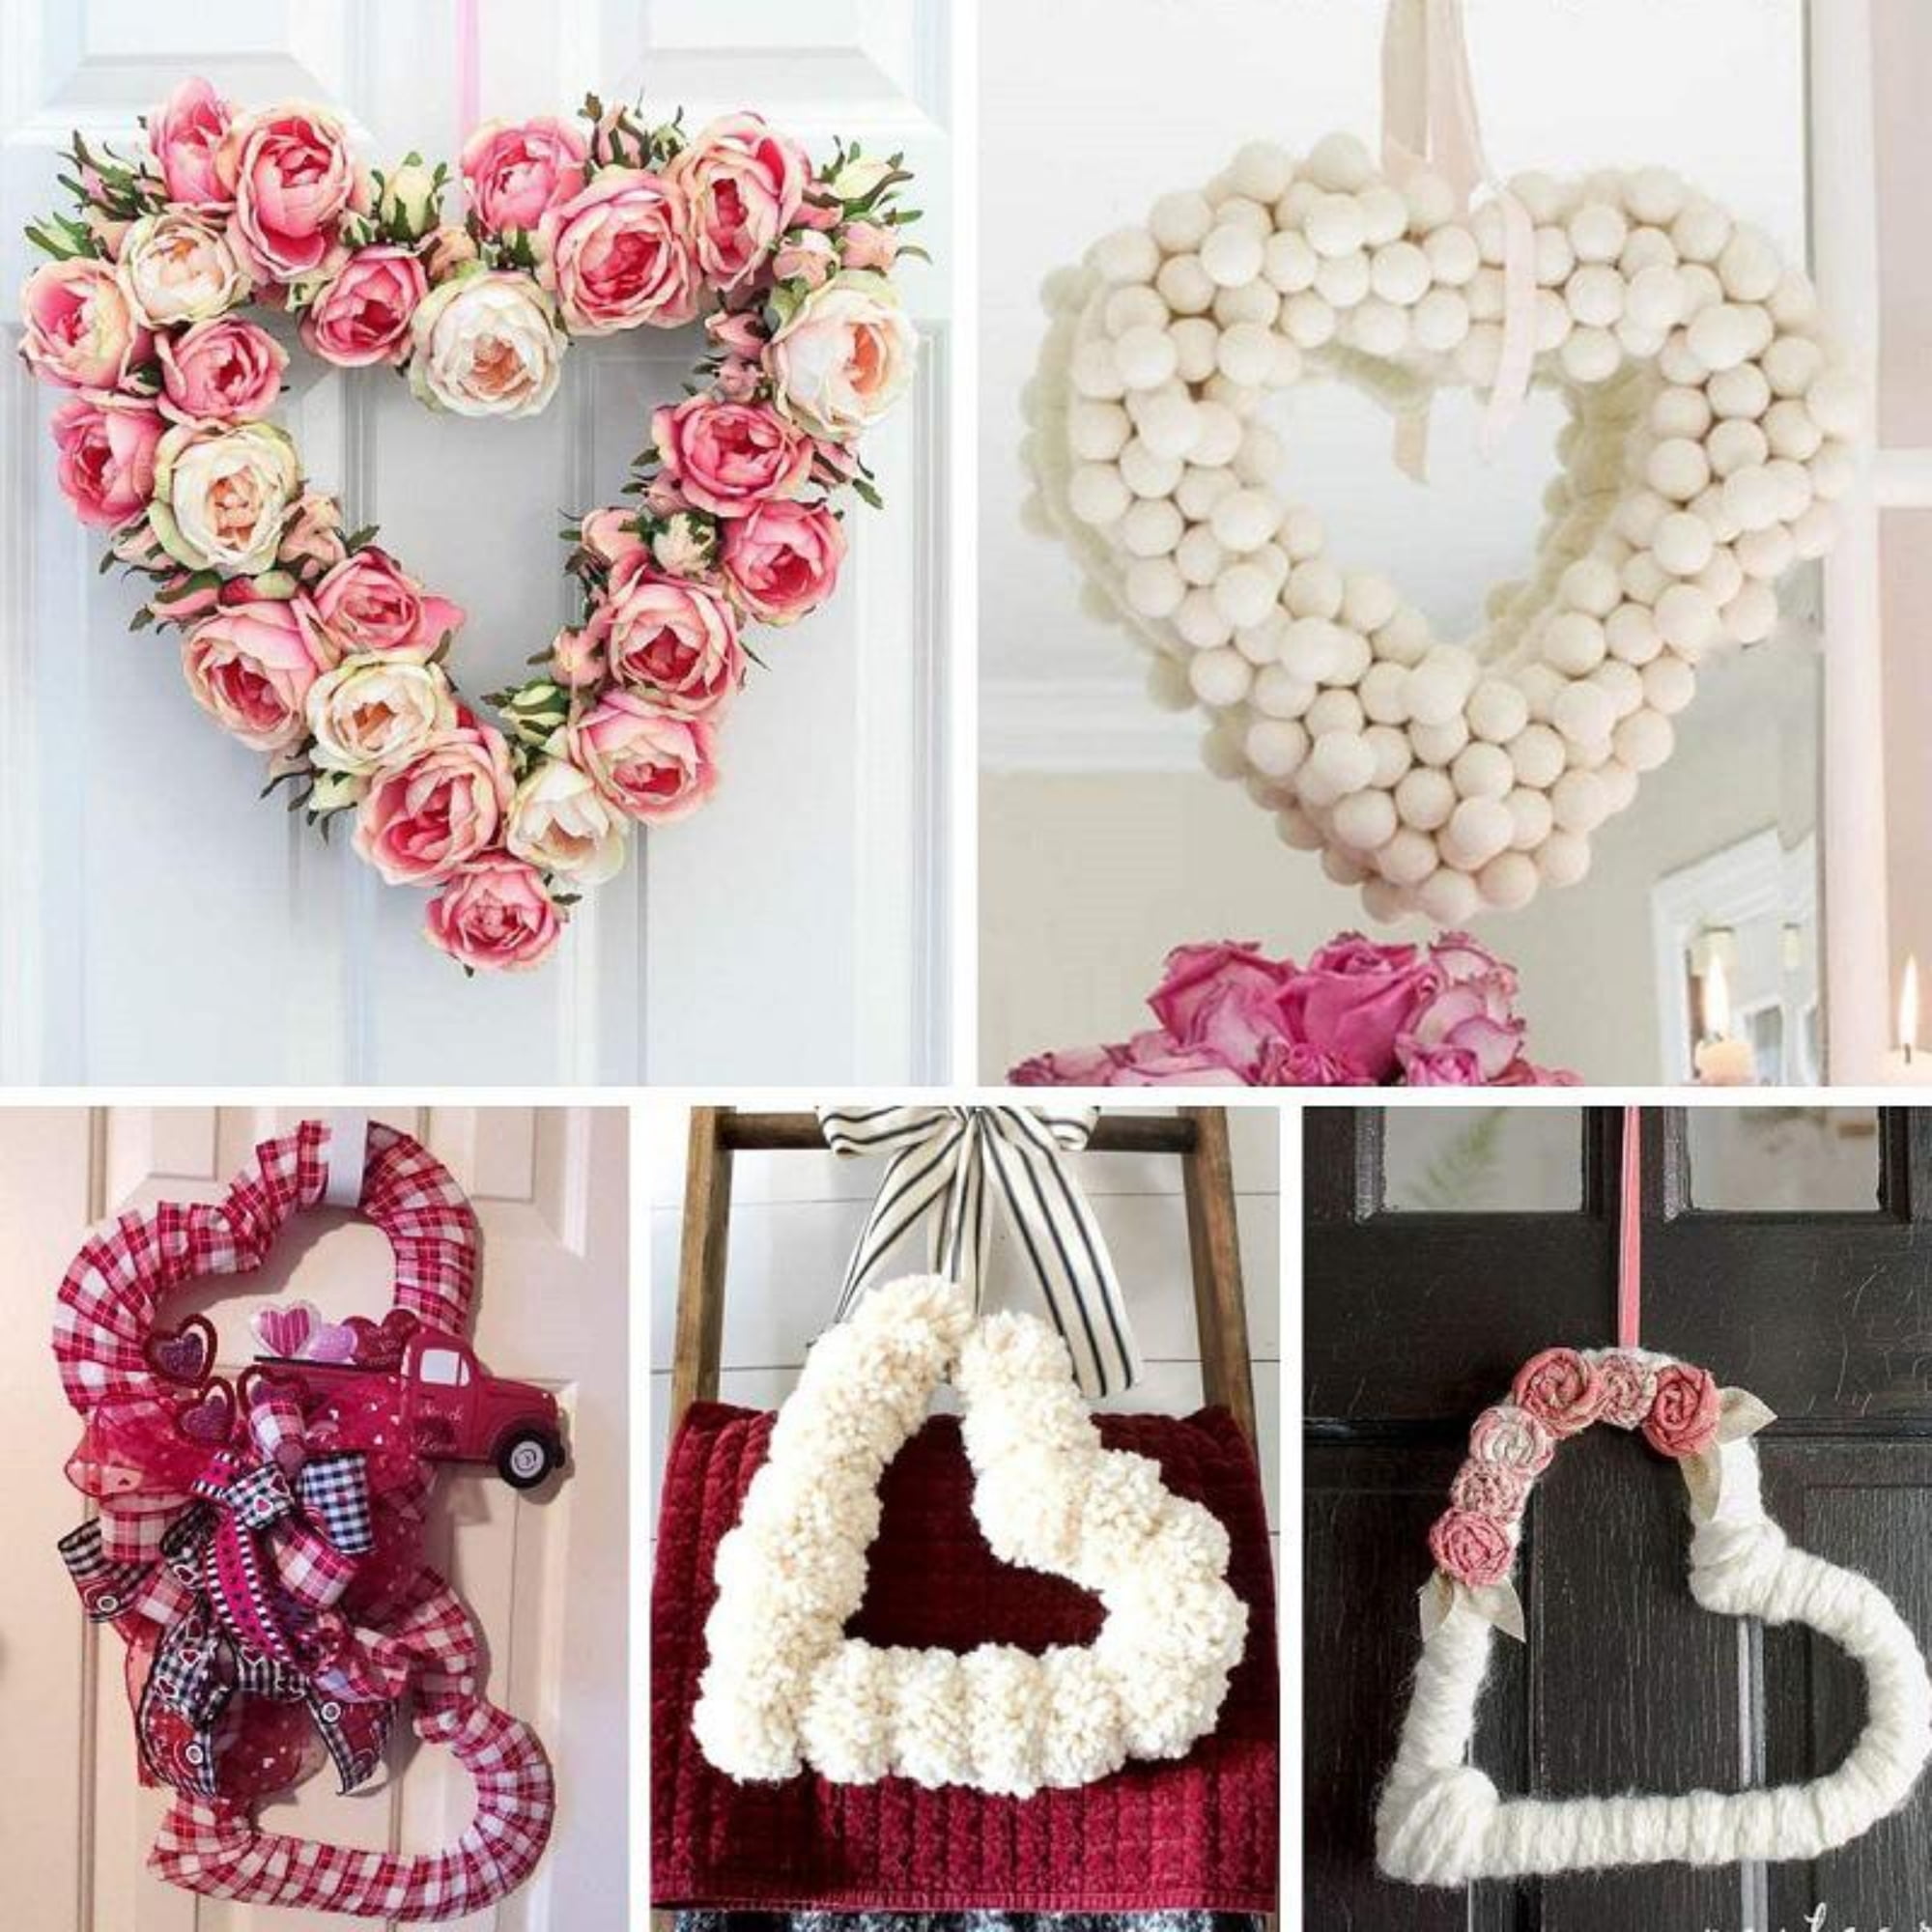 4 Pack Heart Metal Wreath 12 Inch Heart Shaped Wire Wreath Frame for Making  DIY Floral Crafts Christmas Valentine's Day Wedding Party Supplies Garden